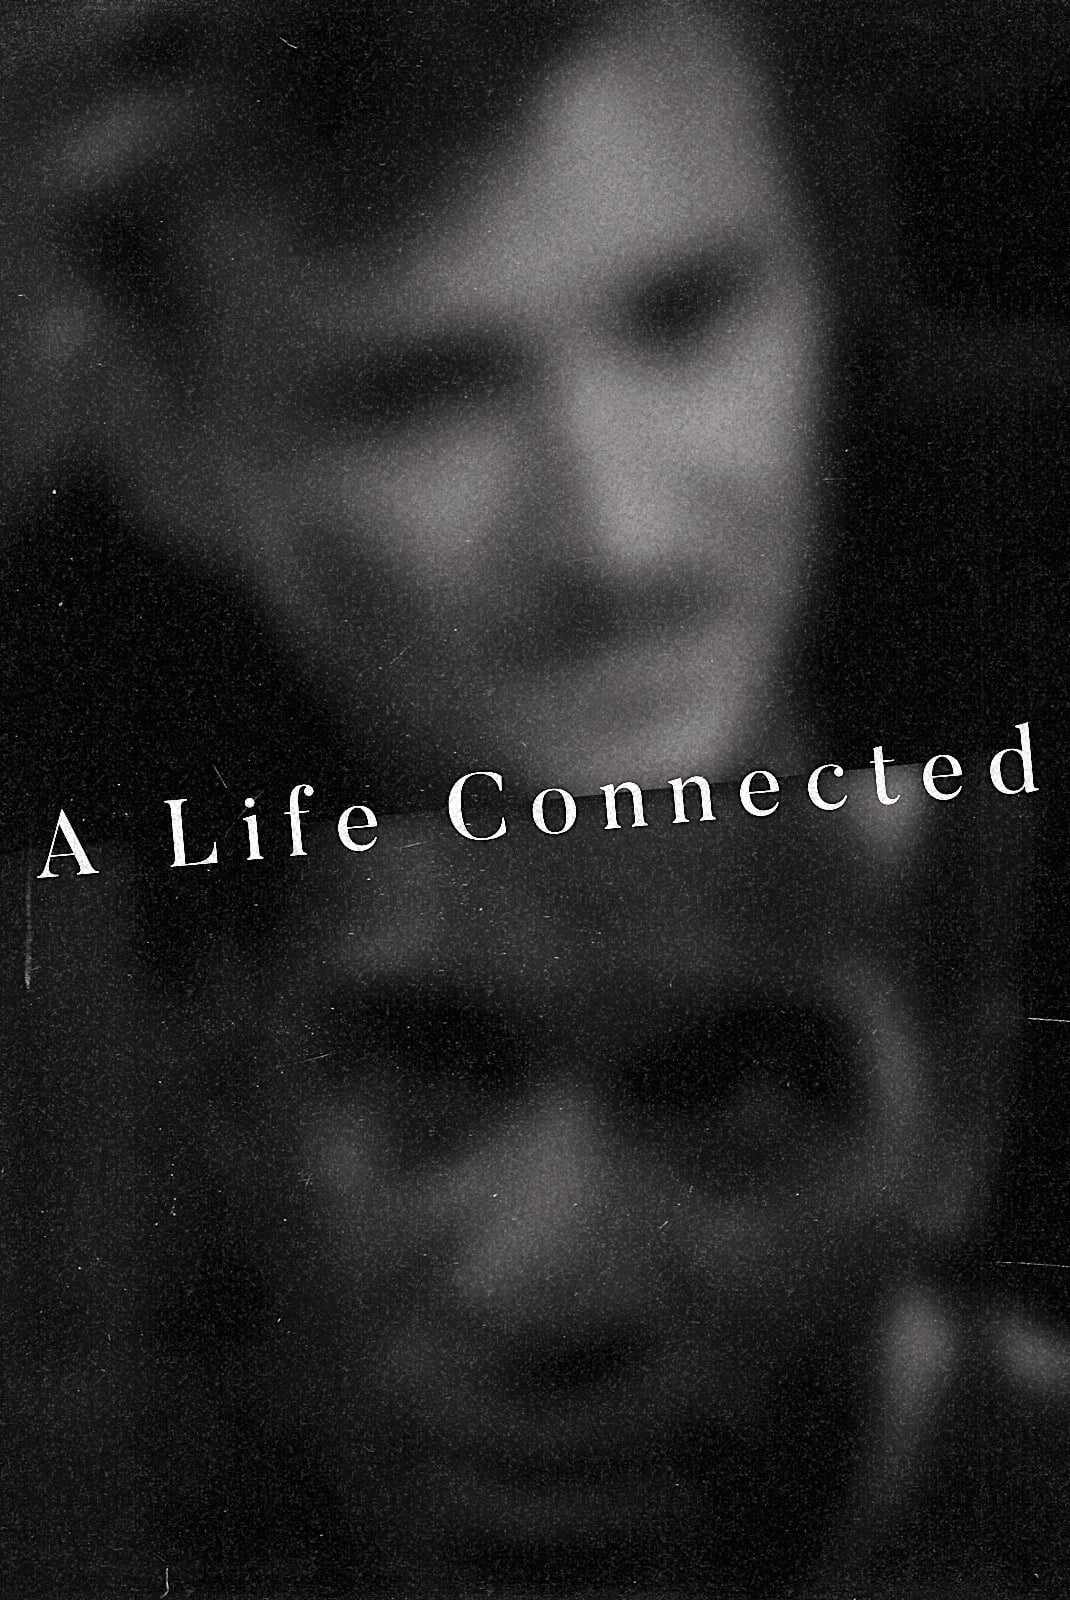 A Life Connected